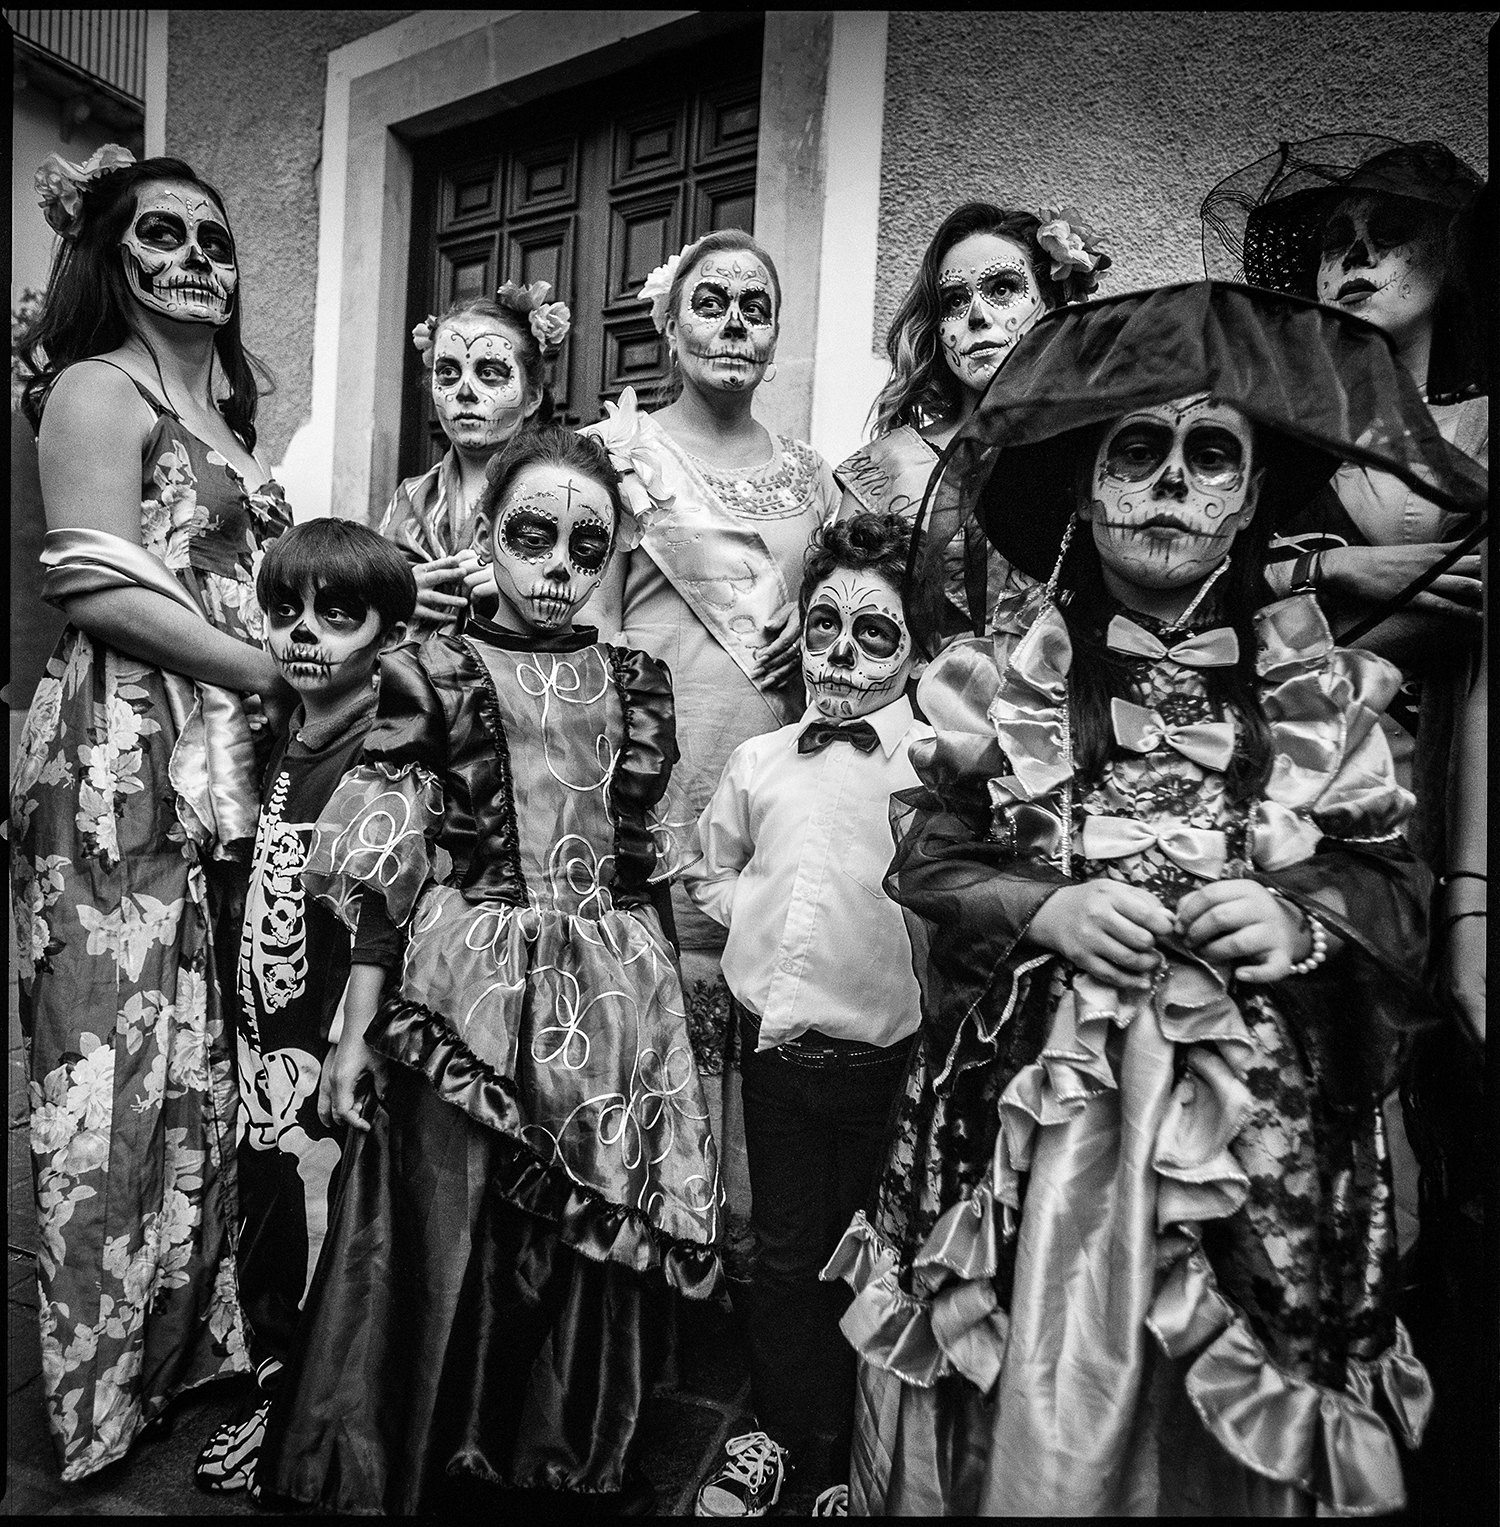  People waiting to join day of the dead parade Guanajuato, Mexico 2018    1:1  